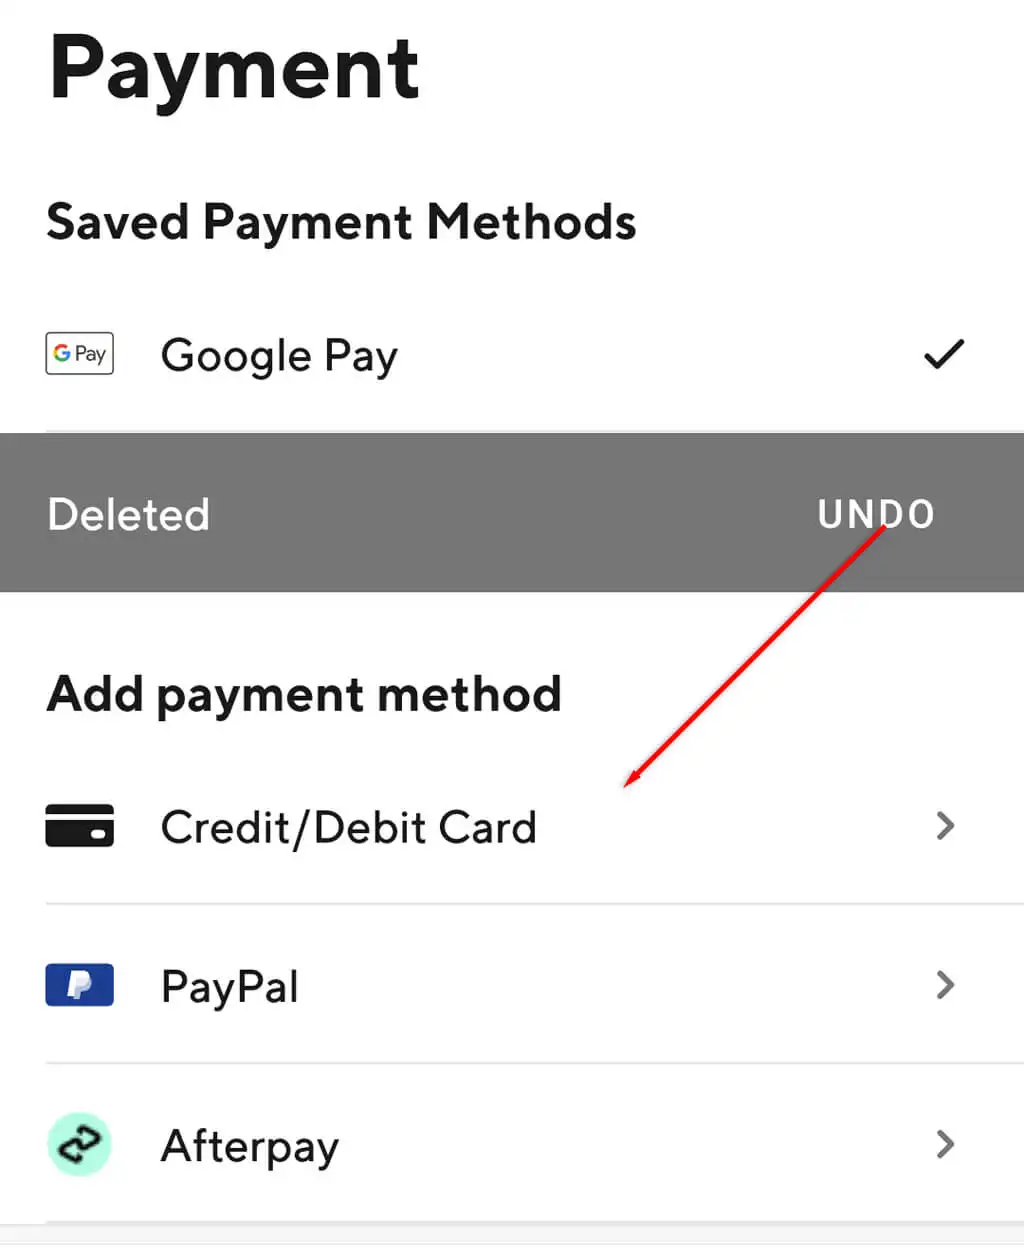 What Payment Methods Does DoorDash Accept?